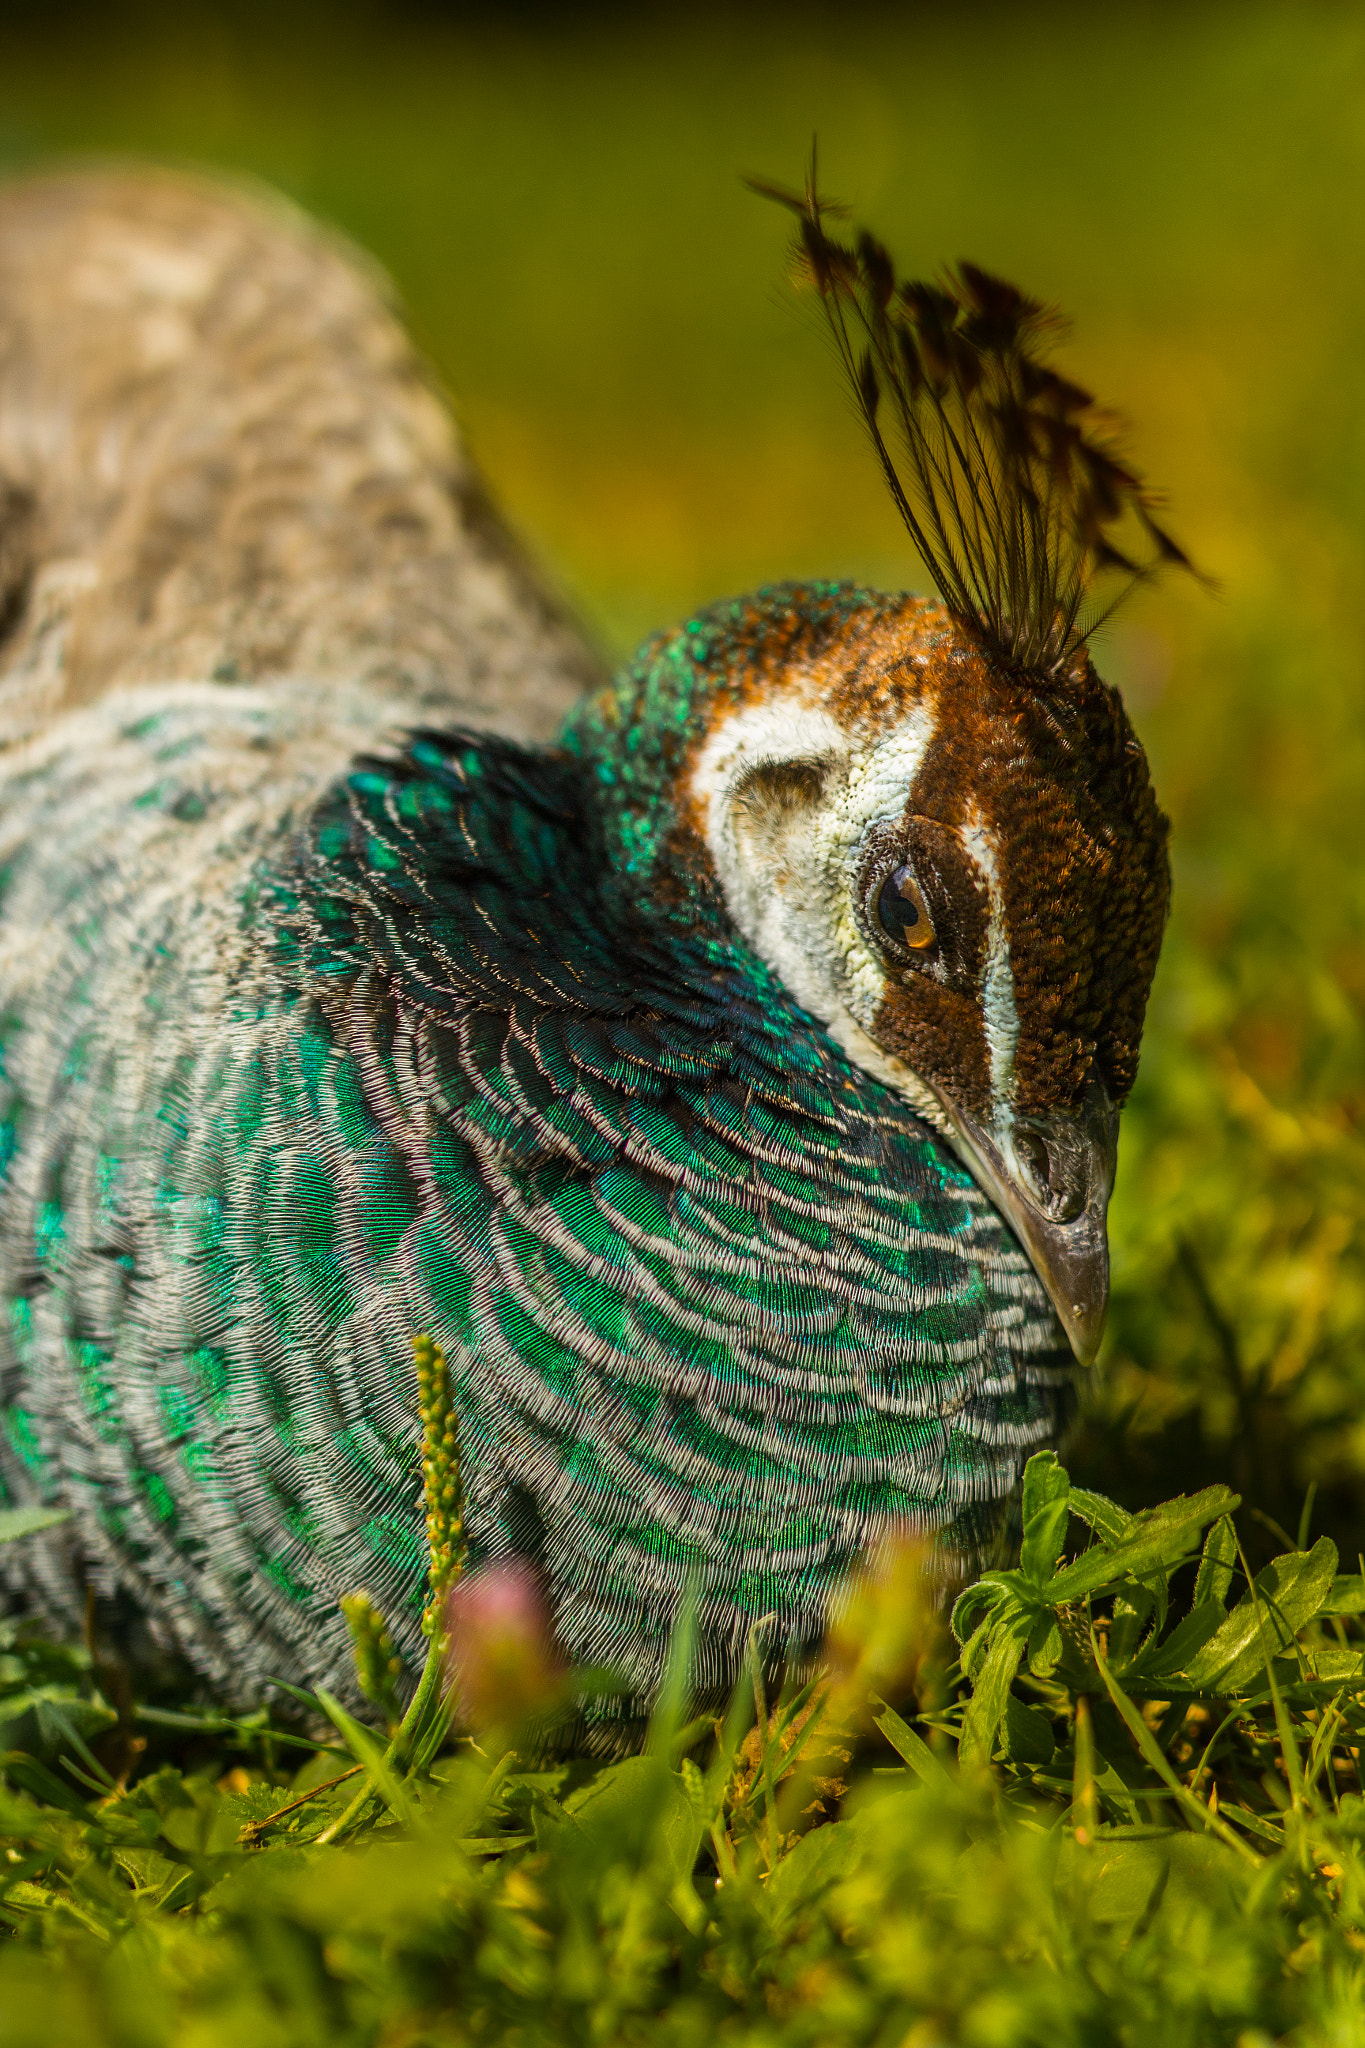 ZEISS Milvus 50mm F1.4 sample photo. Shy peacock photography